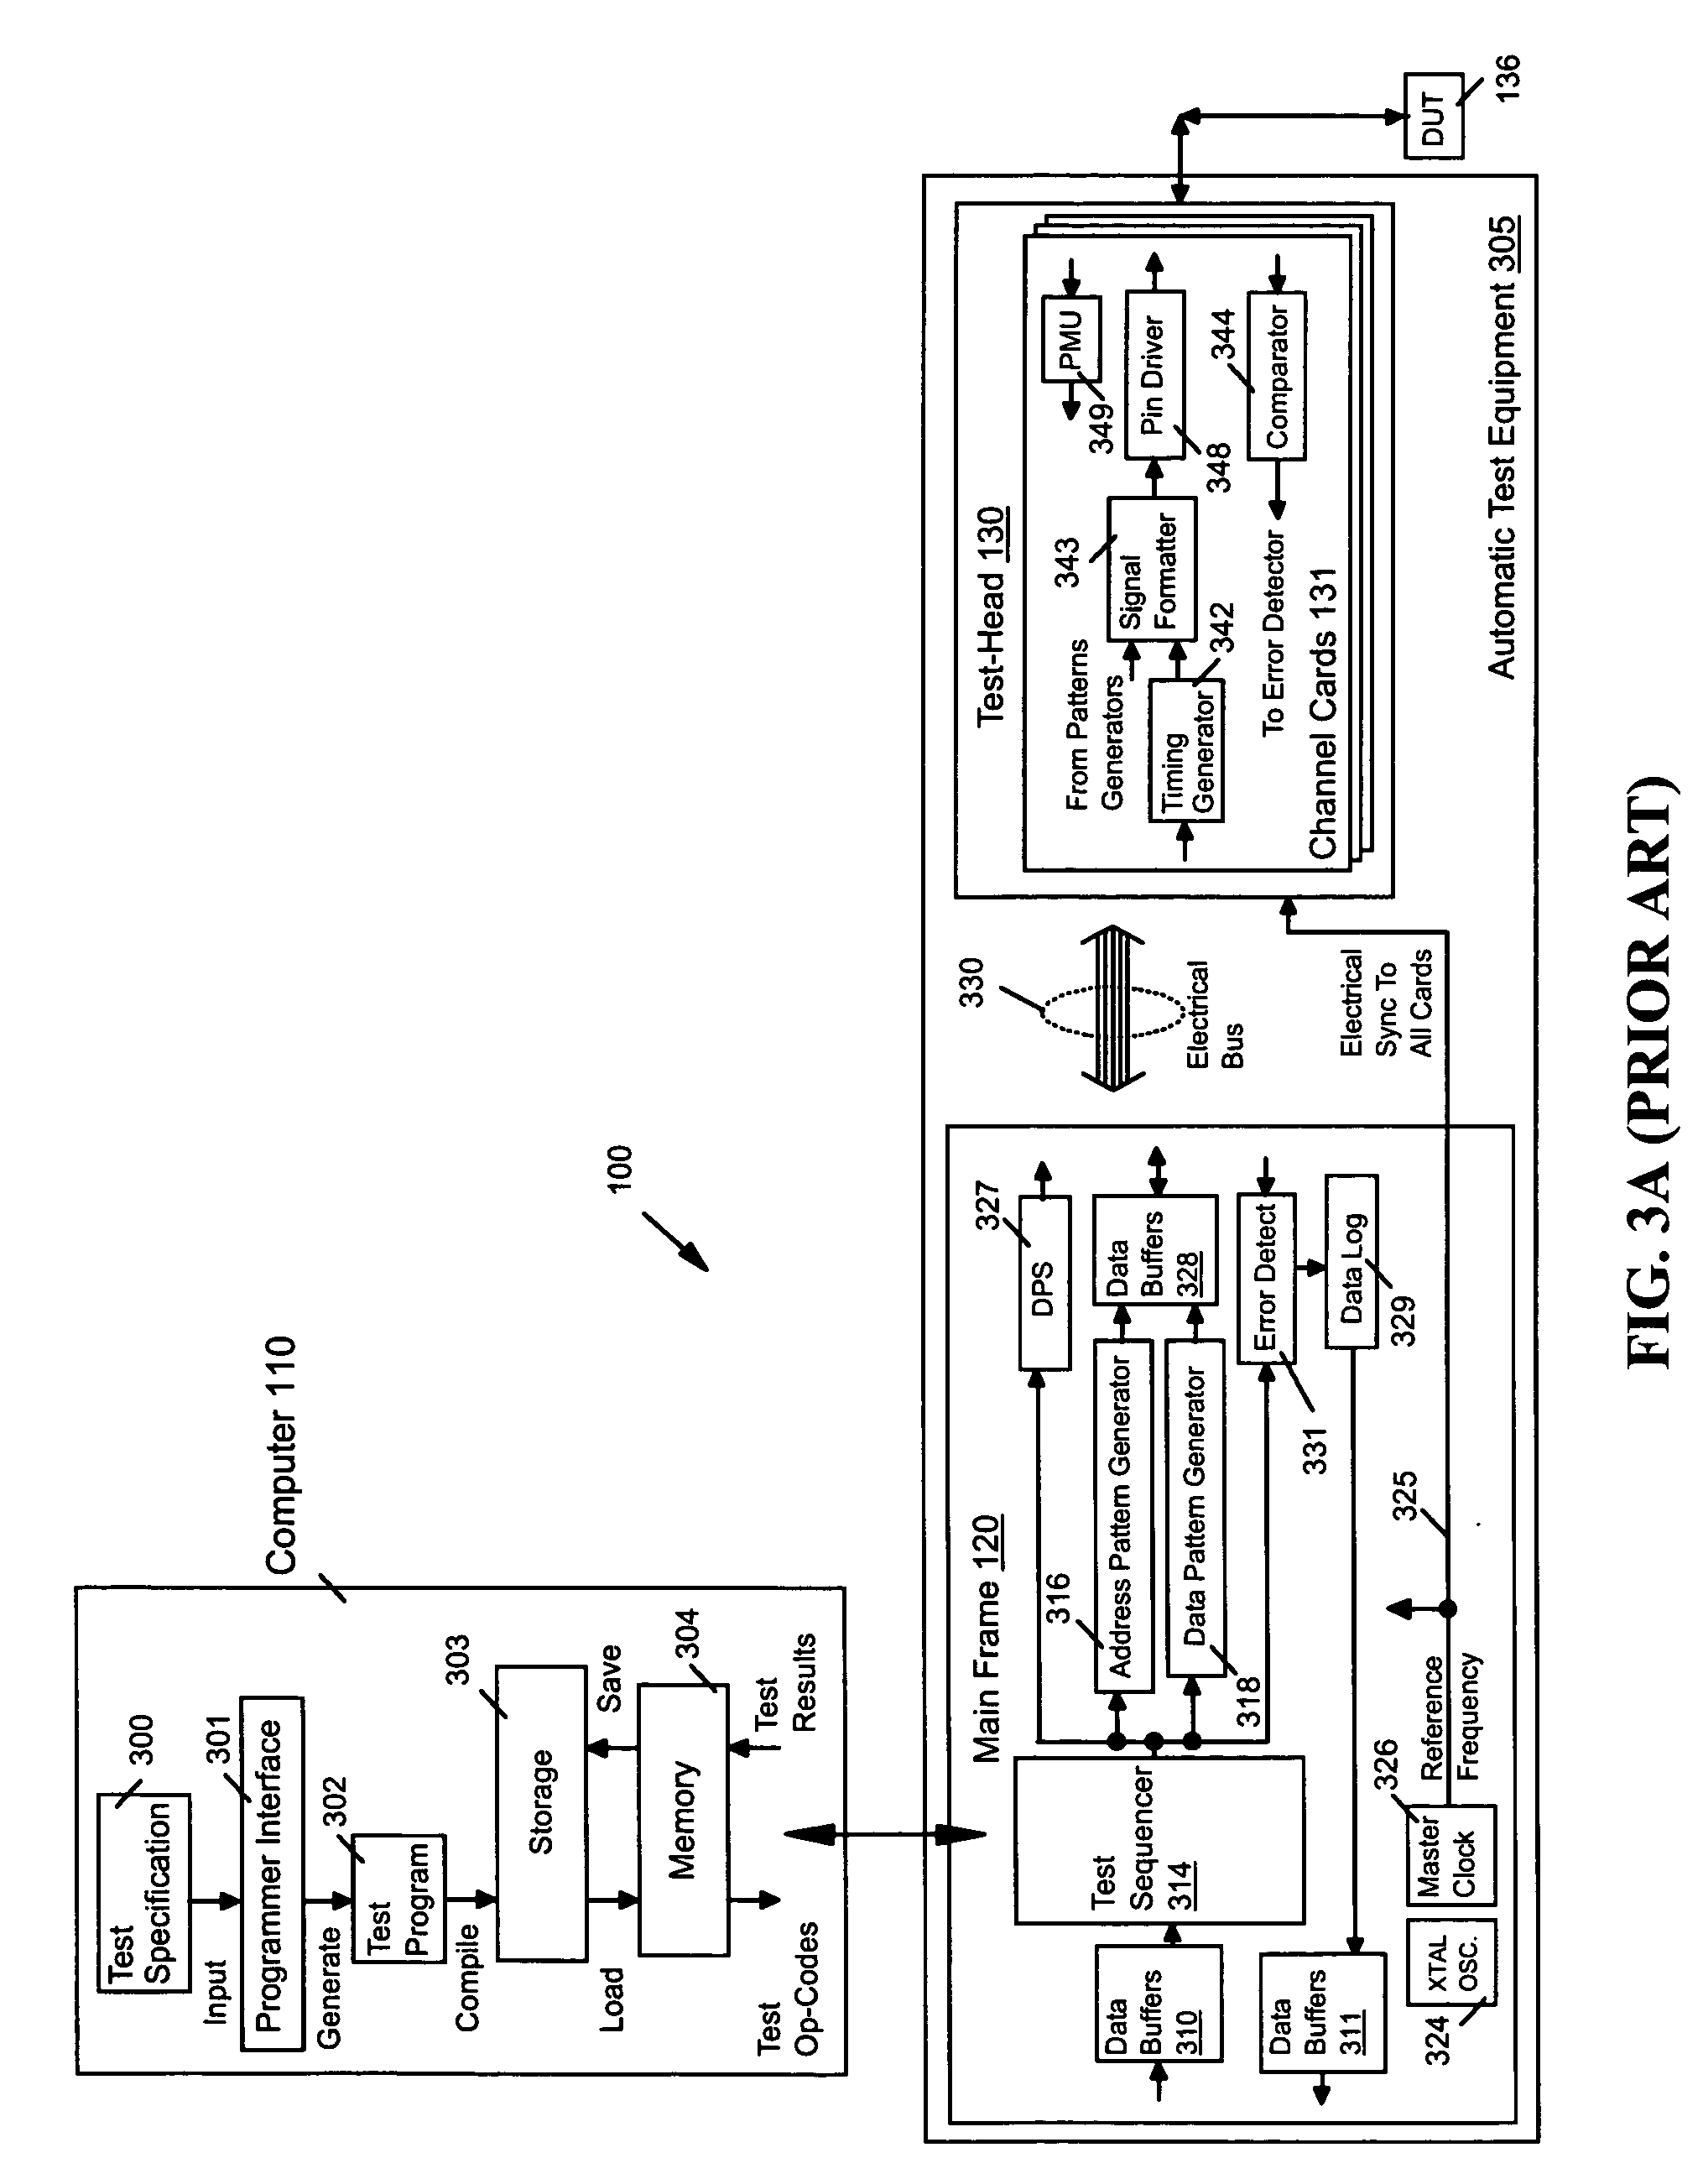 Method, apparatus and computer program product for high speed memory testing